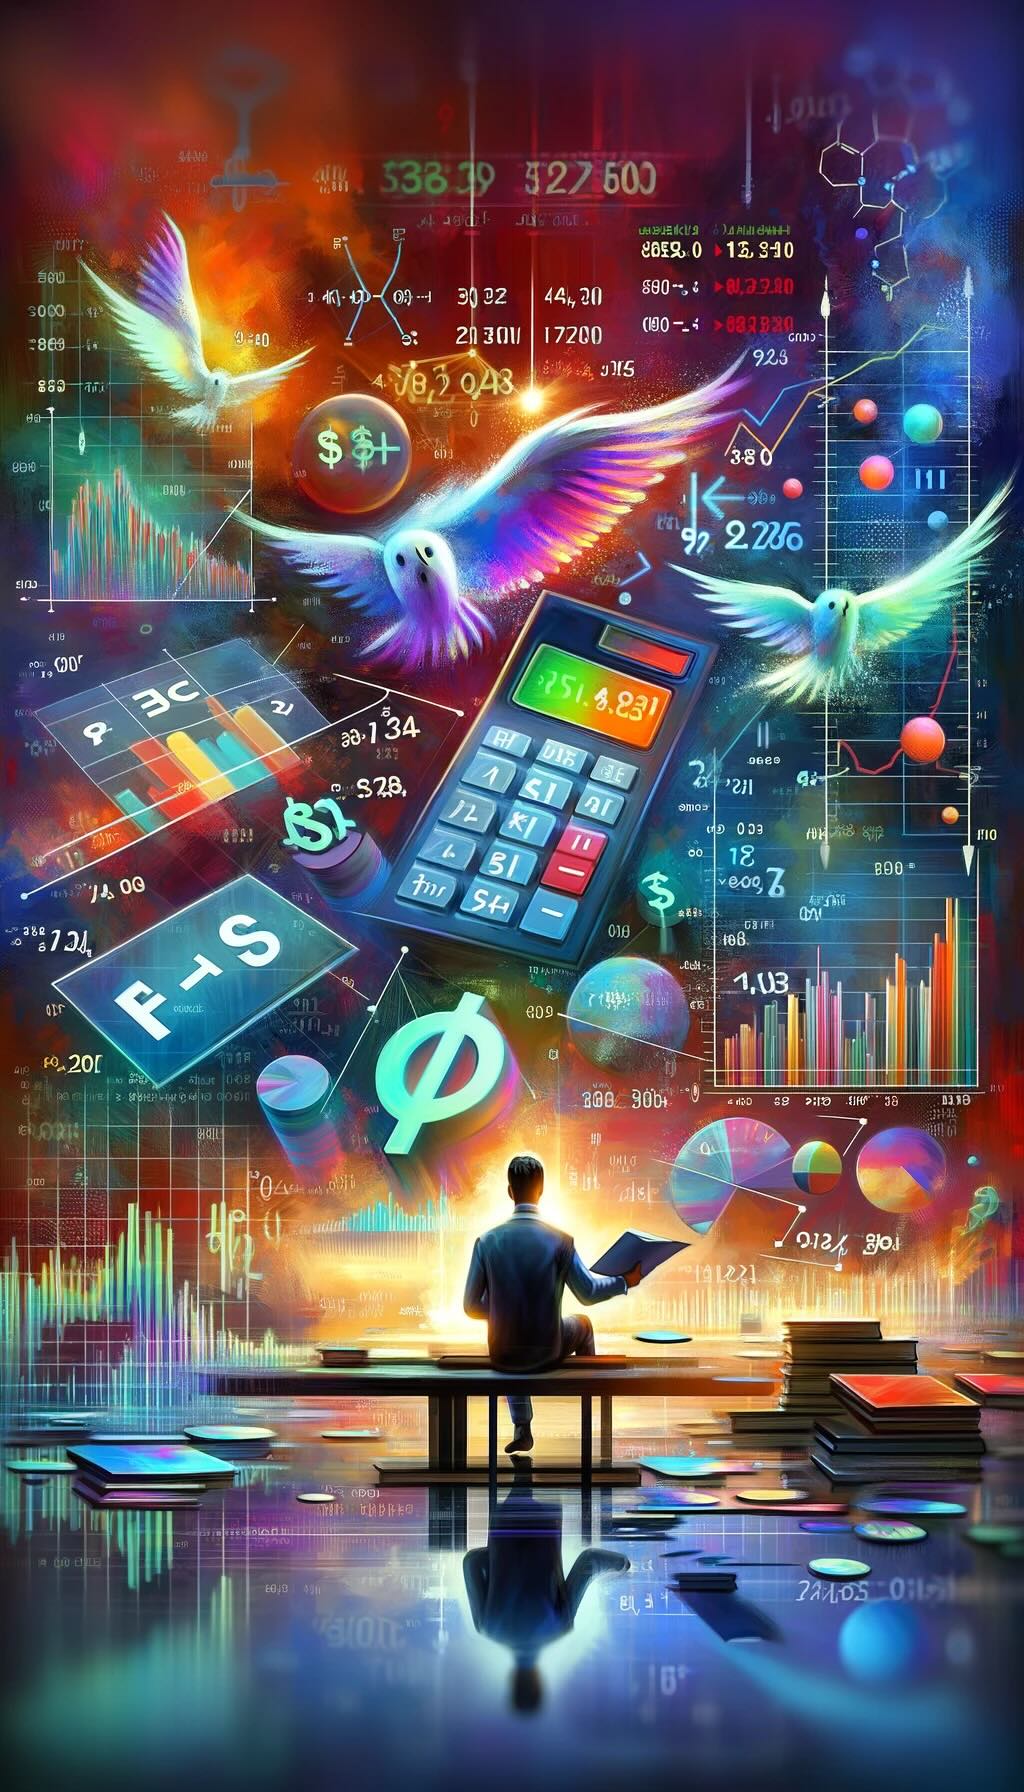 Calculating the Price to Earnings (P/E) Ratio, showcasing an investor analyzing a vivid chart that juxtaposes a company's stock price with its Earnings Per Share (EPS). A giant calculator and mathematical symbols float nearby, symbolizing the analytical process. The P/E Ratio itself is creatively illustrated, perhaps as a glowing figure or a scale that balances stock price against EPS, highlighting the metric's role in gauging the value investors place on each dollar of earnings. Against a backdrop of abstract financial landscapes, where graphs and numbers merge into a dynamic, colorful tableau, the piece explores the nuanced balance between empirical data and projections in stock valuation, encouraging a deeper understanding of investment strategies and market valuation.